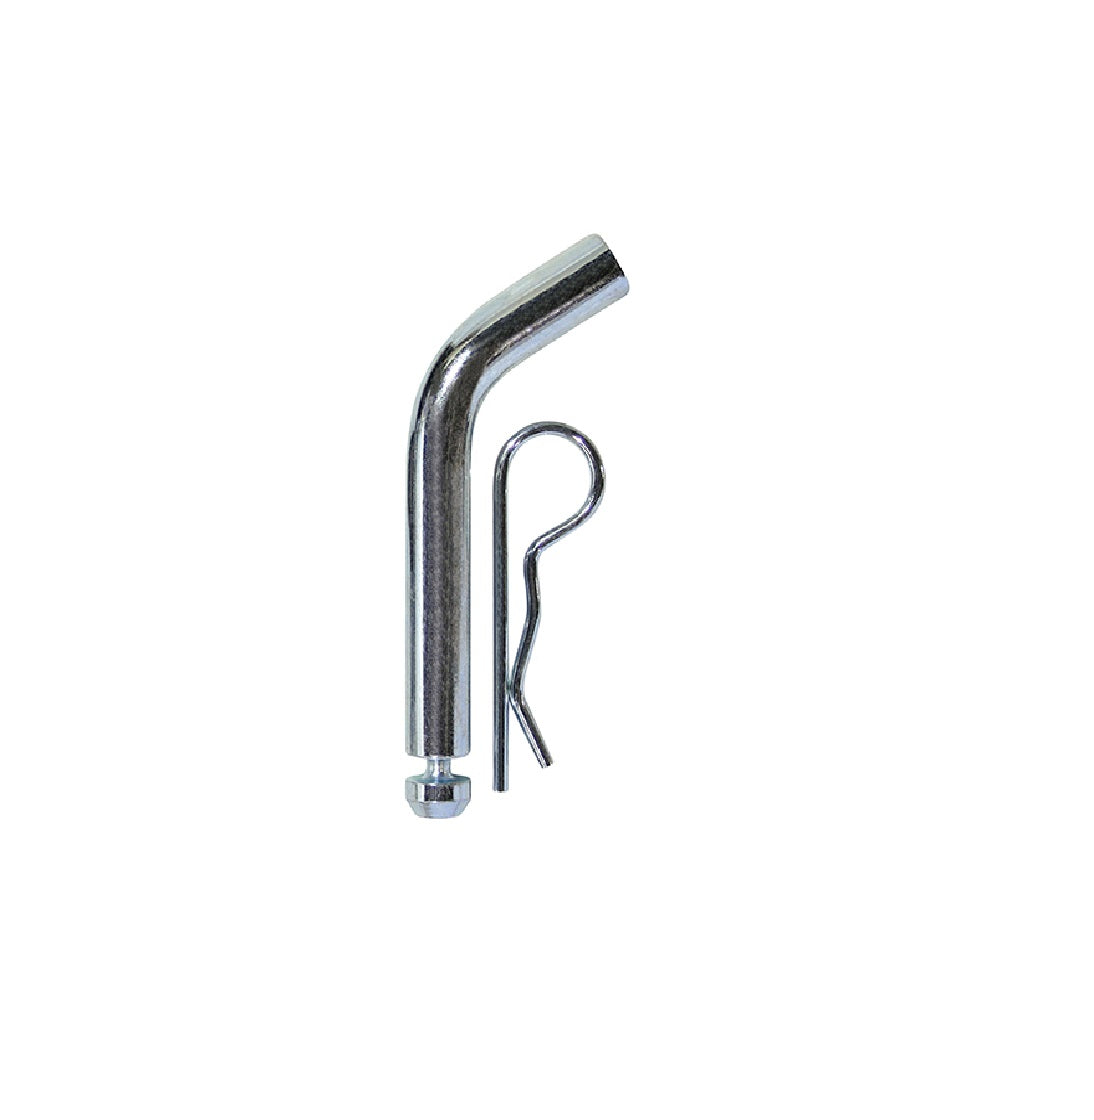 Reese 7010500 Hitch Pin & Clip, 5/8 inch